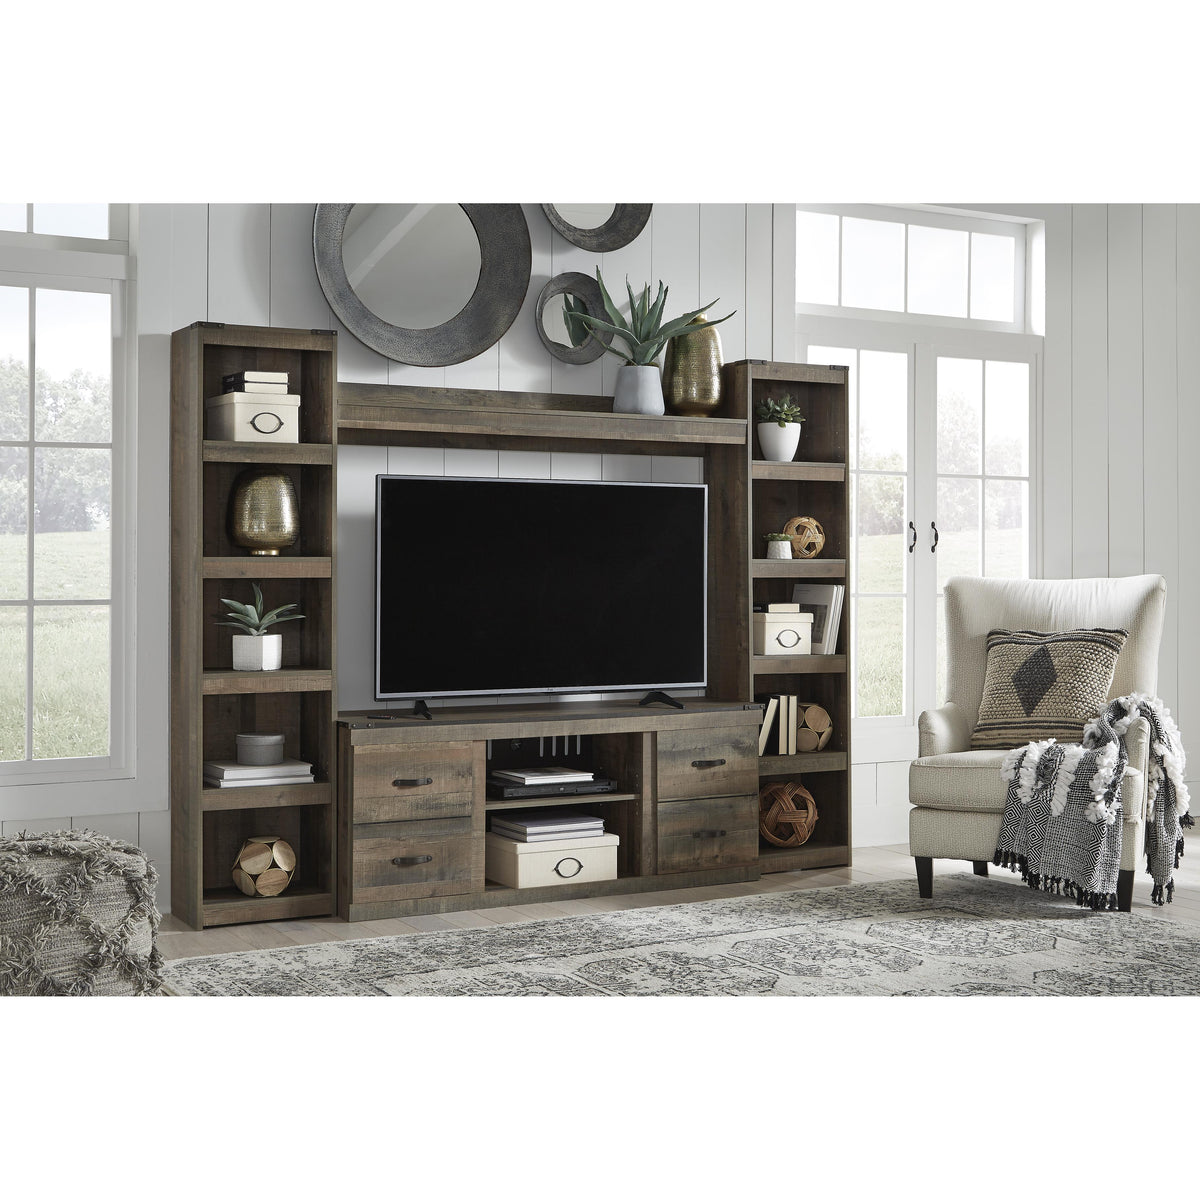 Signature Design by Ashley Trinell EW0446W7 4 pc Entertainment Center